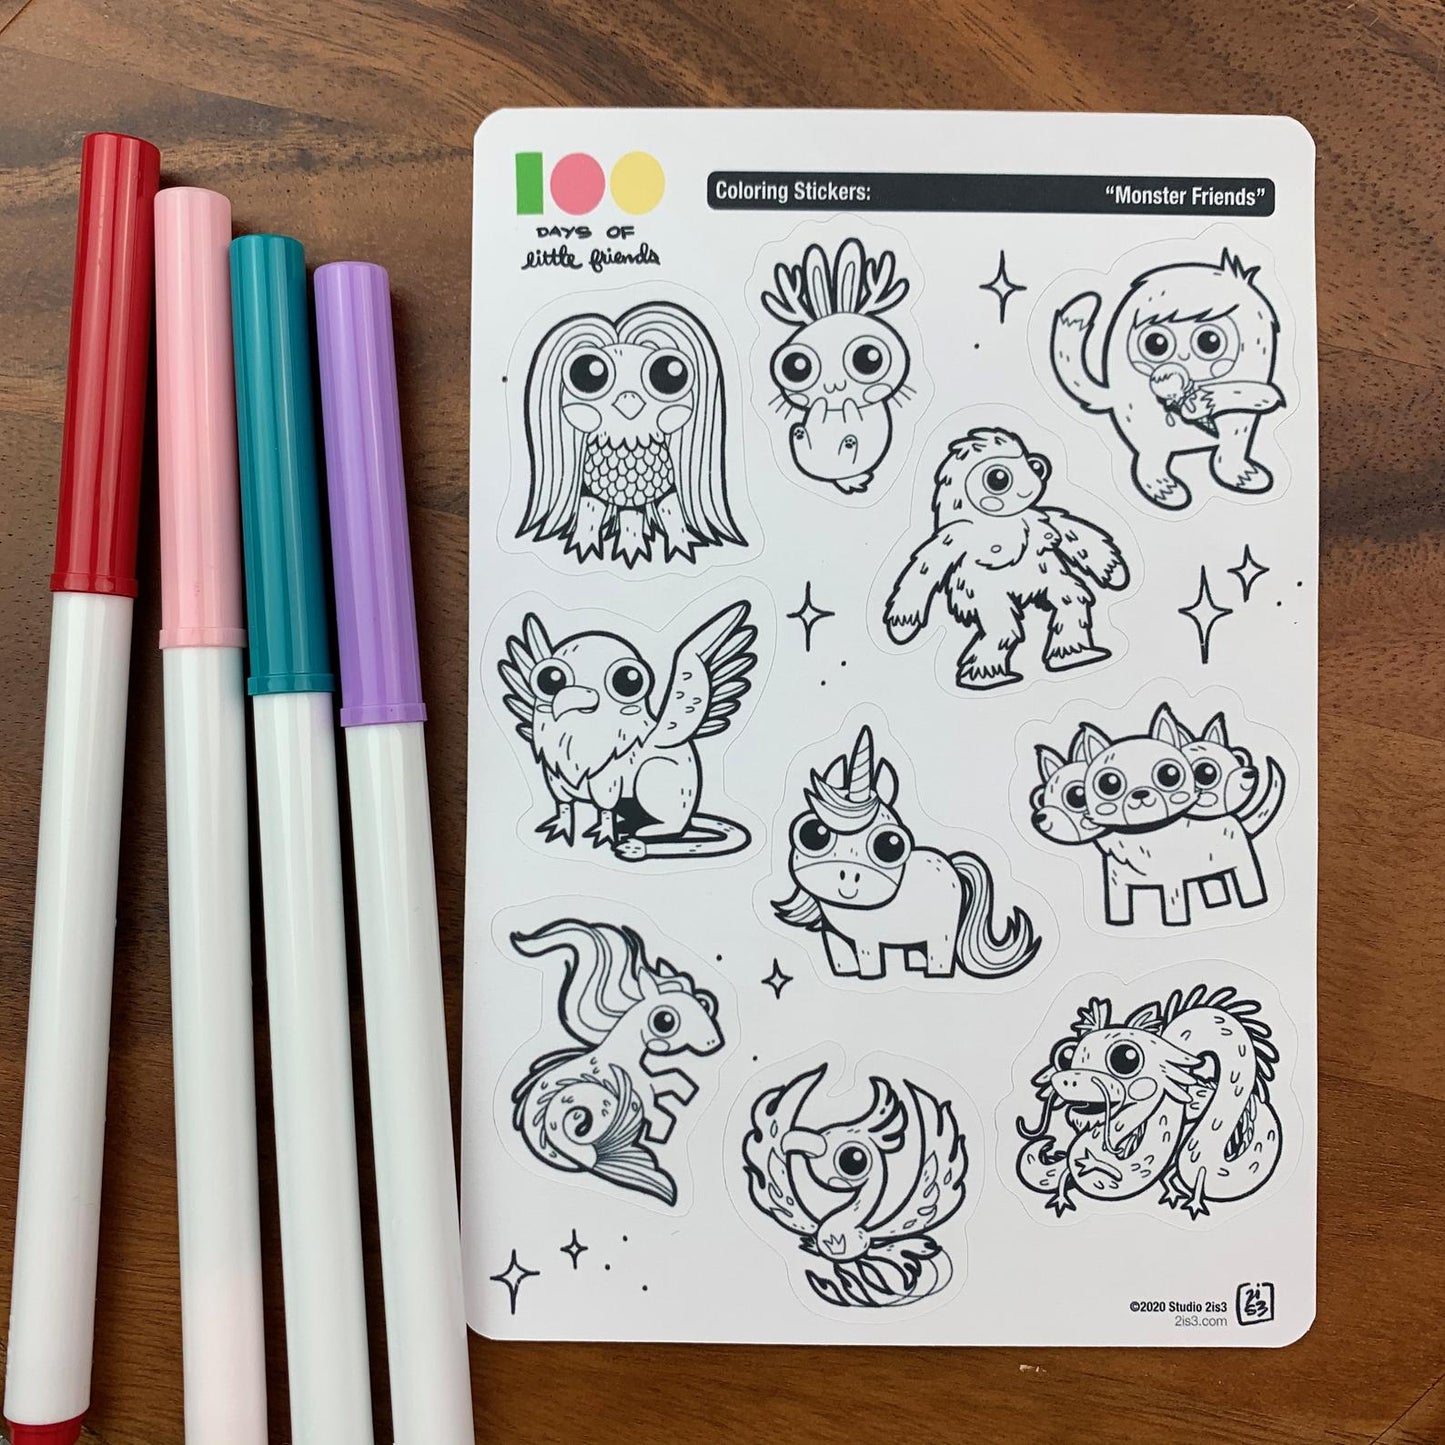 Markers and a sticker sheet with 10 little animal stickers on it. A Jackalope, Hellhound, Griffin, Phoenix, Hippocampus, Dragon, Unicorn, Bigfoot/Sasquatch, Yeti/Abominable Snowman, and Amabie.